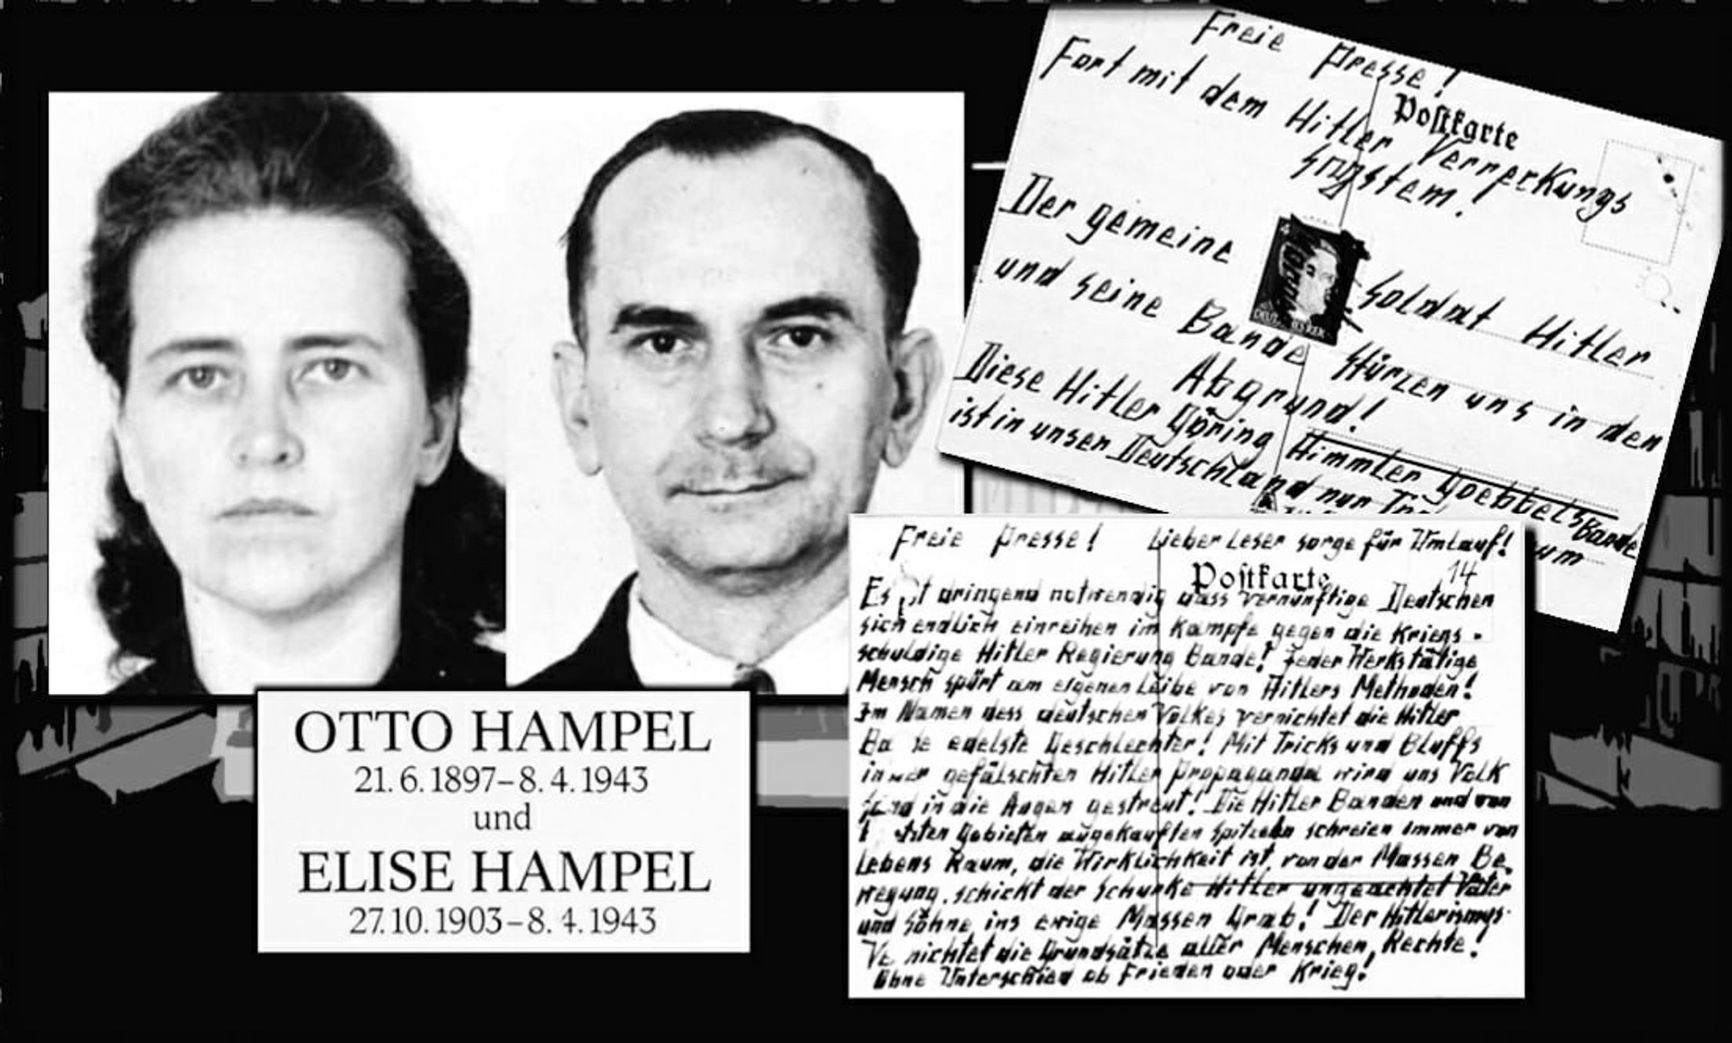 Elise and Otto Hampel and their anti-Hitler postcards